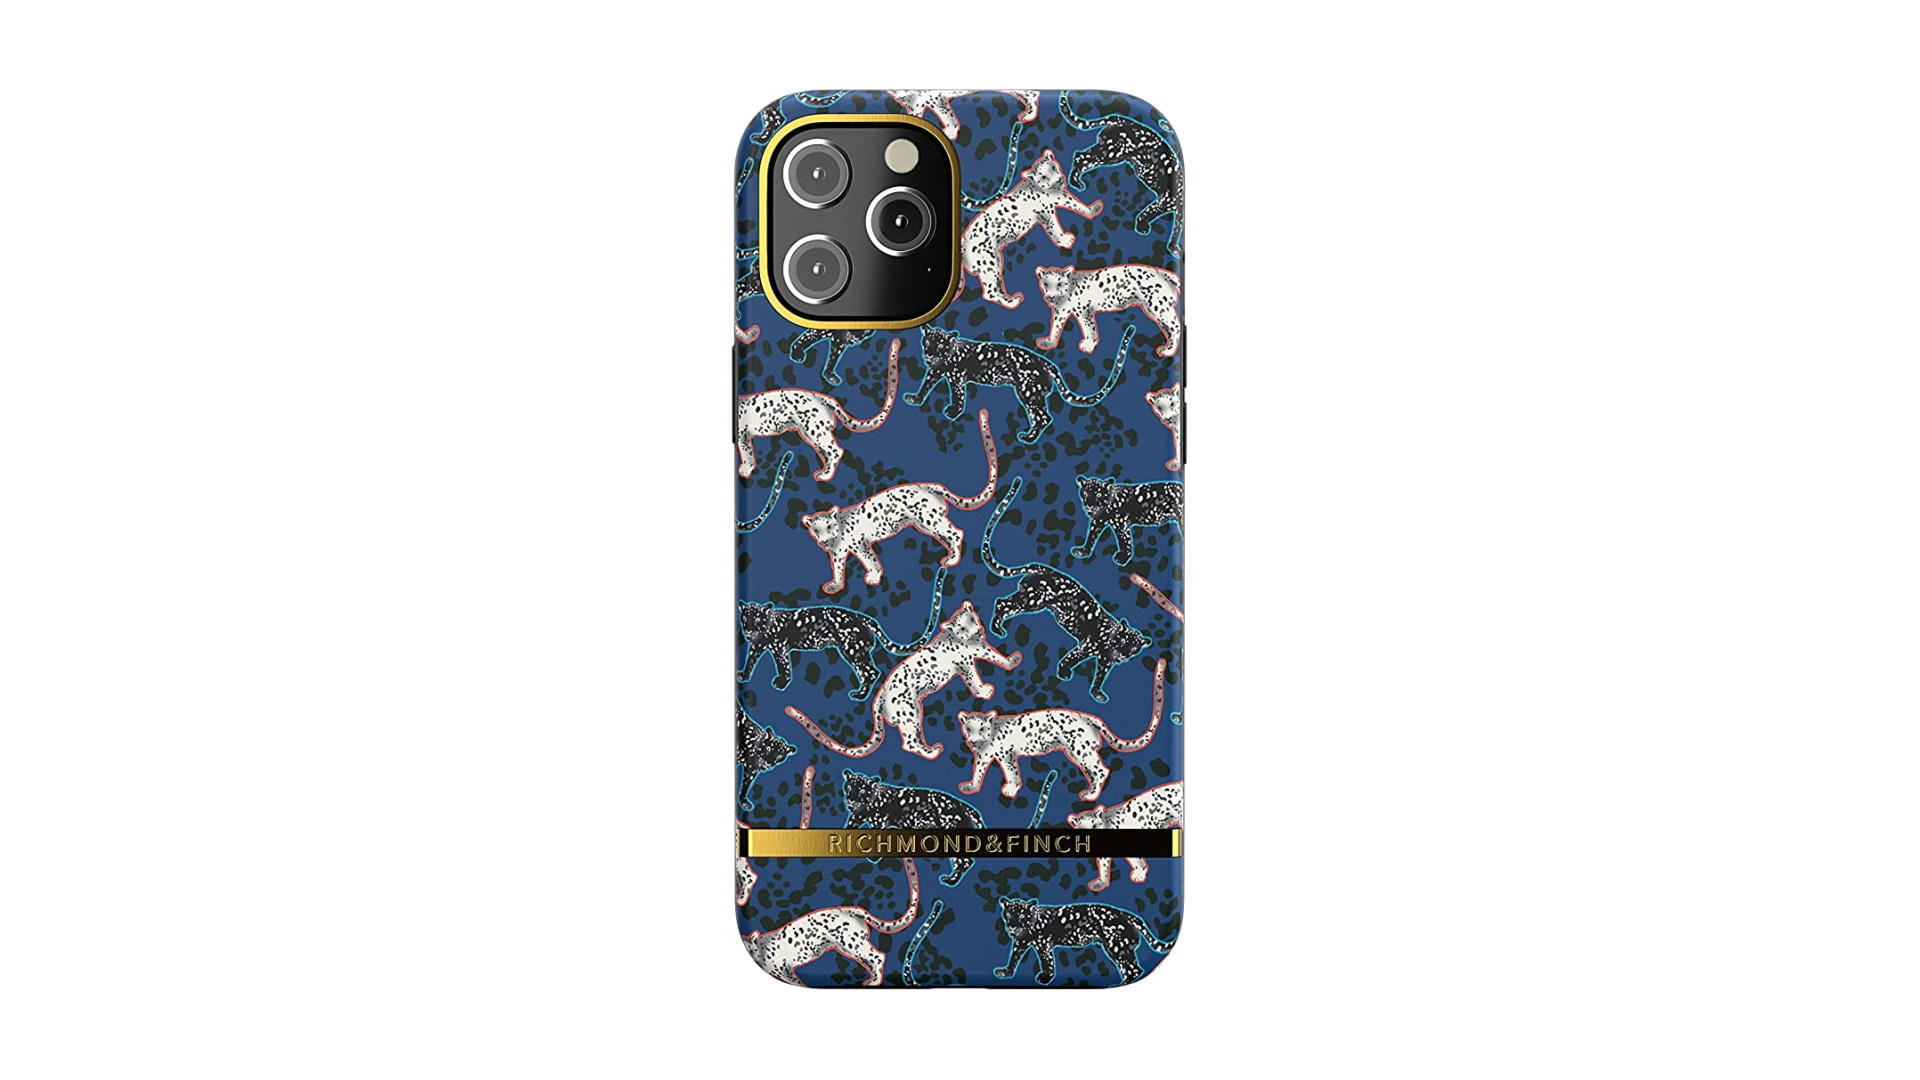 Richmond and Finch iPhone 12 Pro Max case